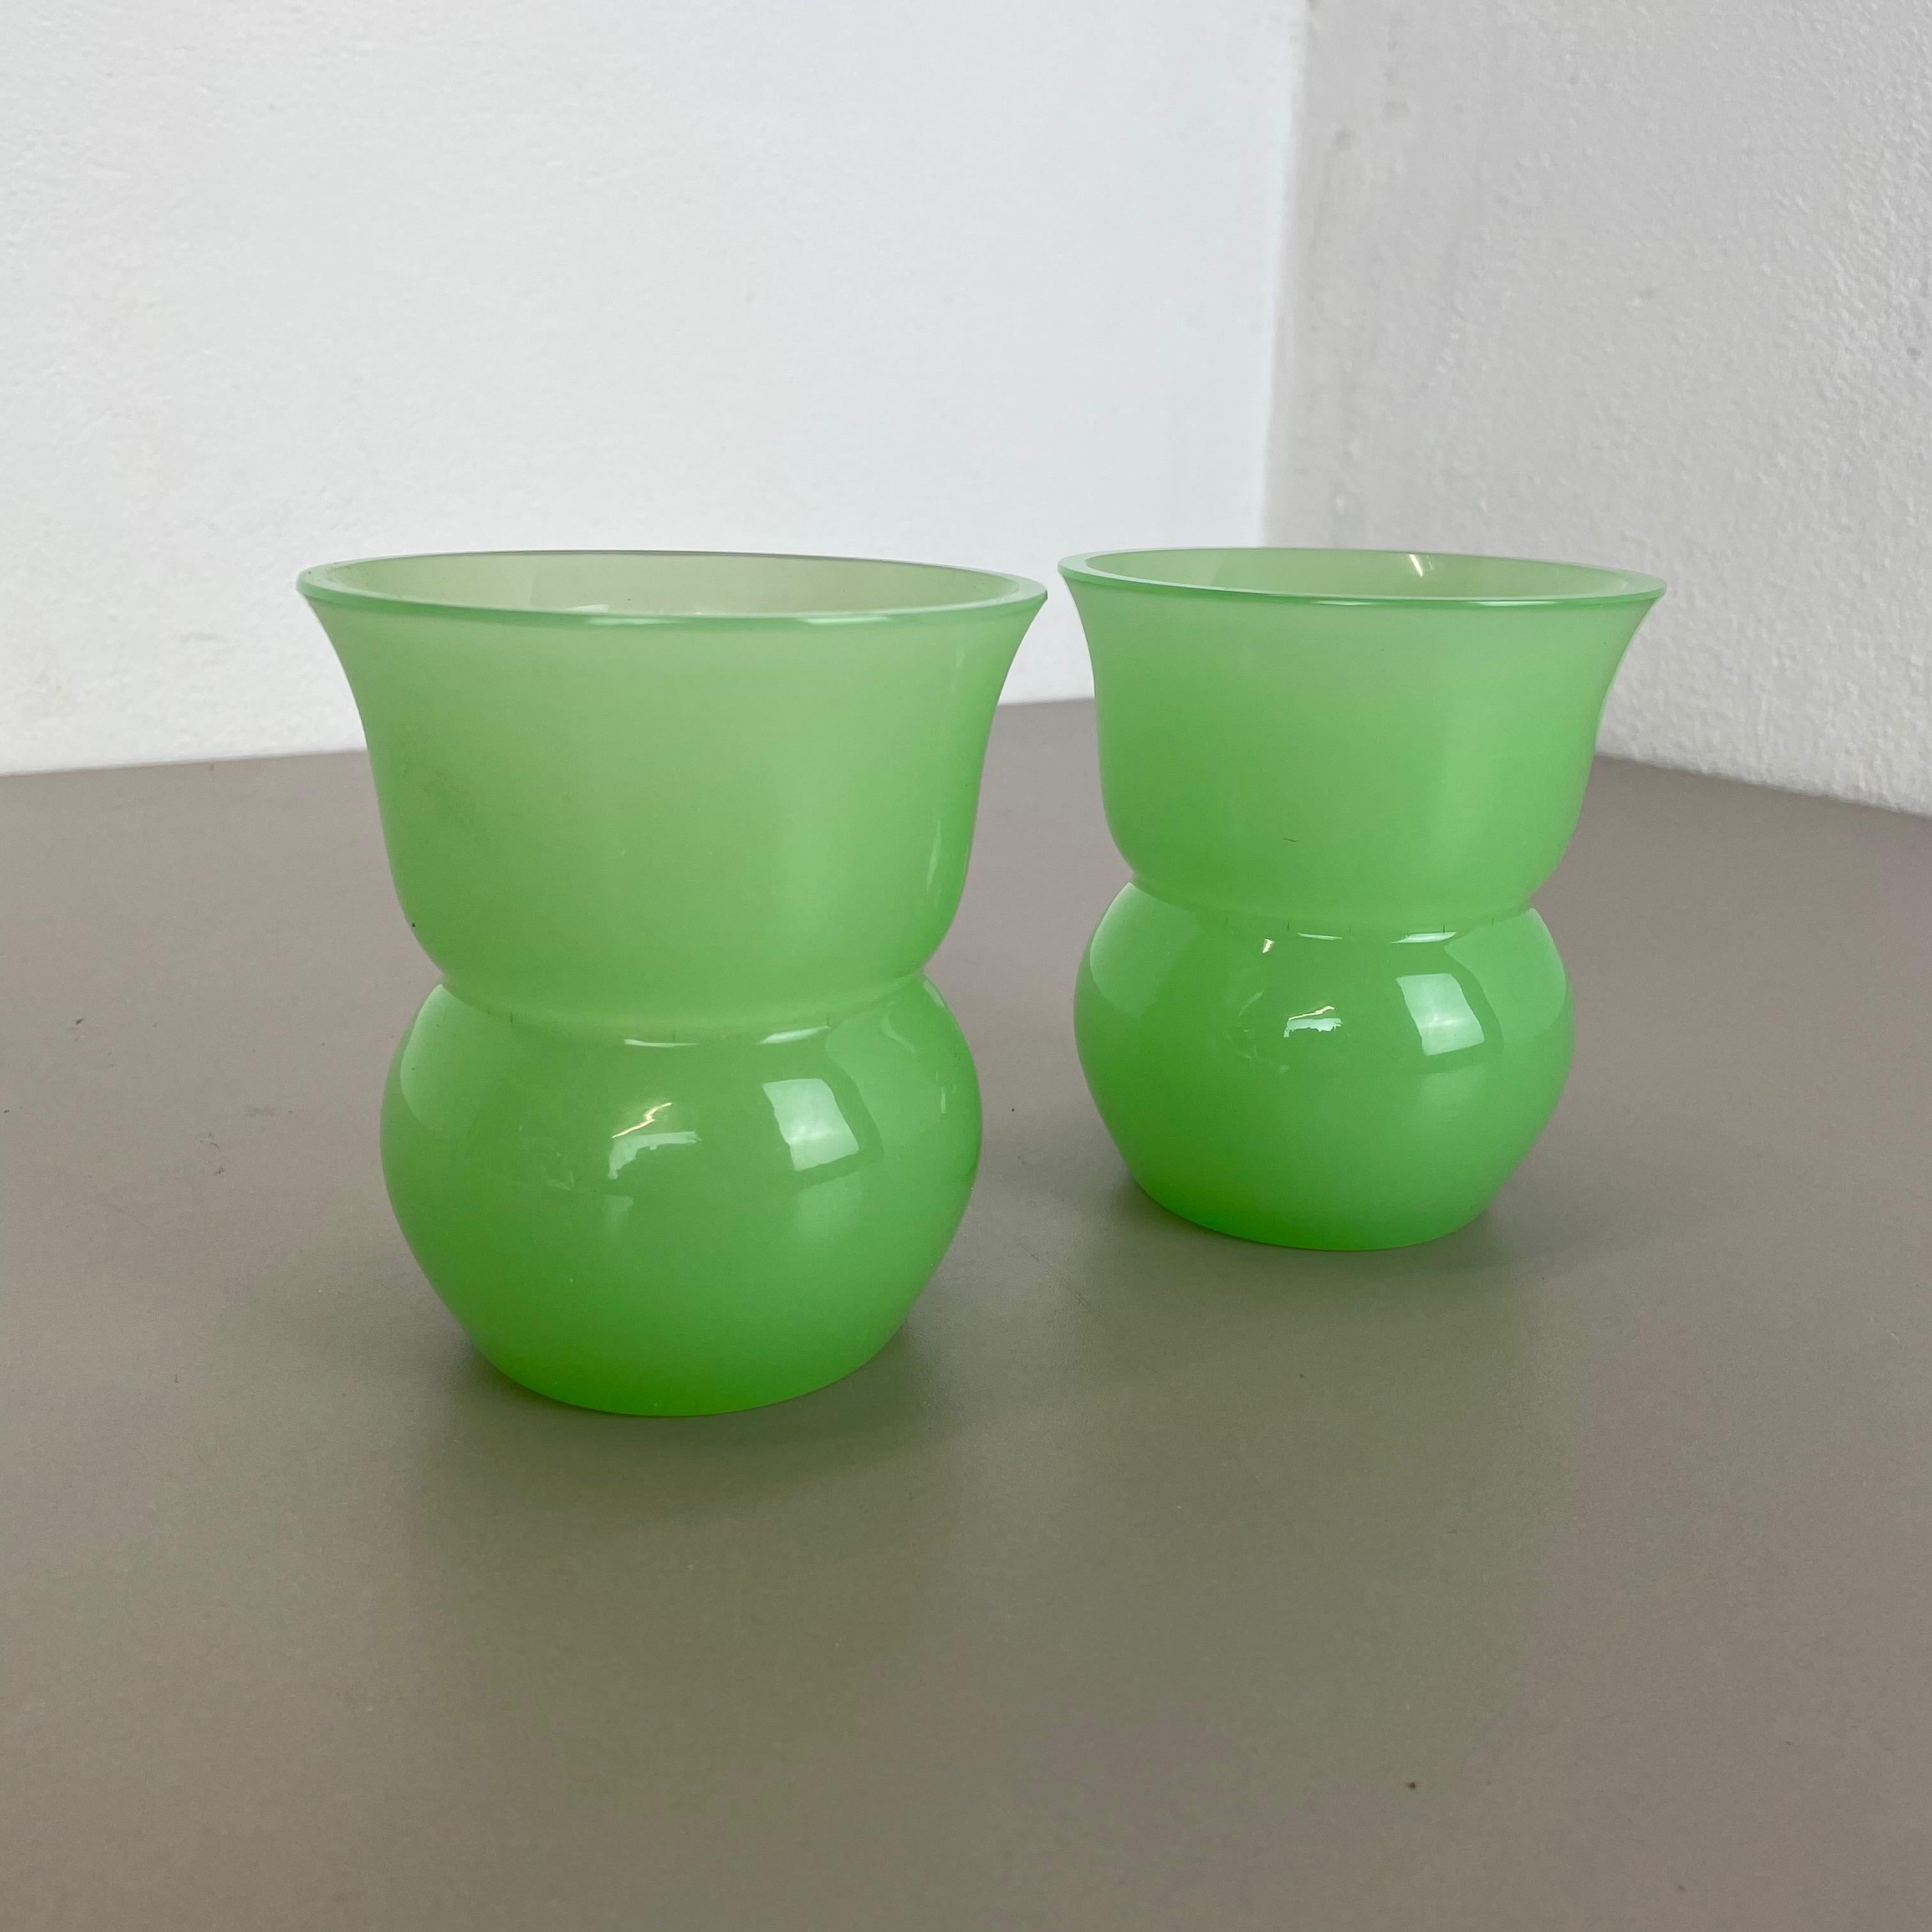 Italian Set of 2 Green New Old Stock Murano Opaline Glass Vases by Gino Cenedese, 1960s For Sale